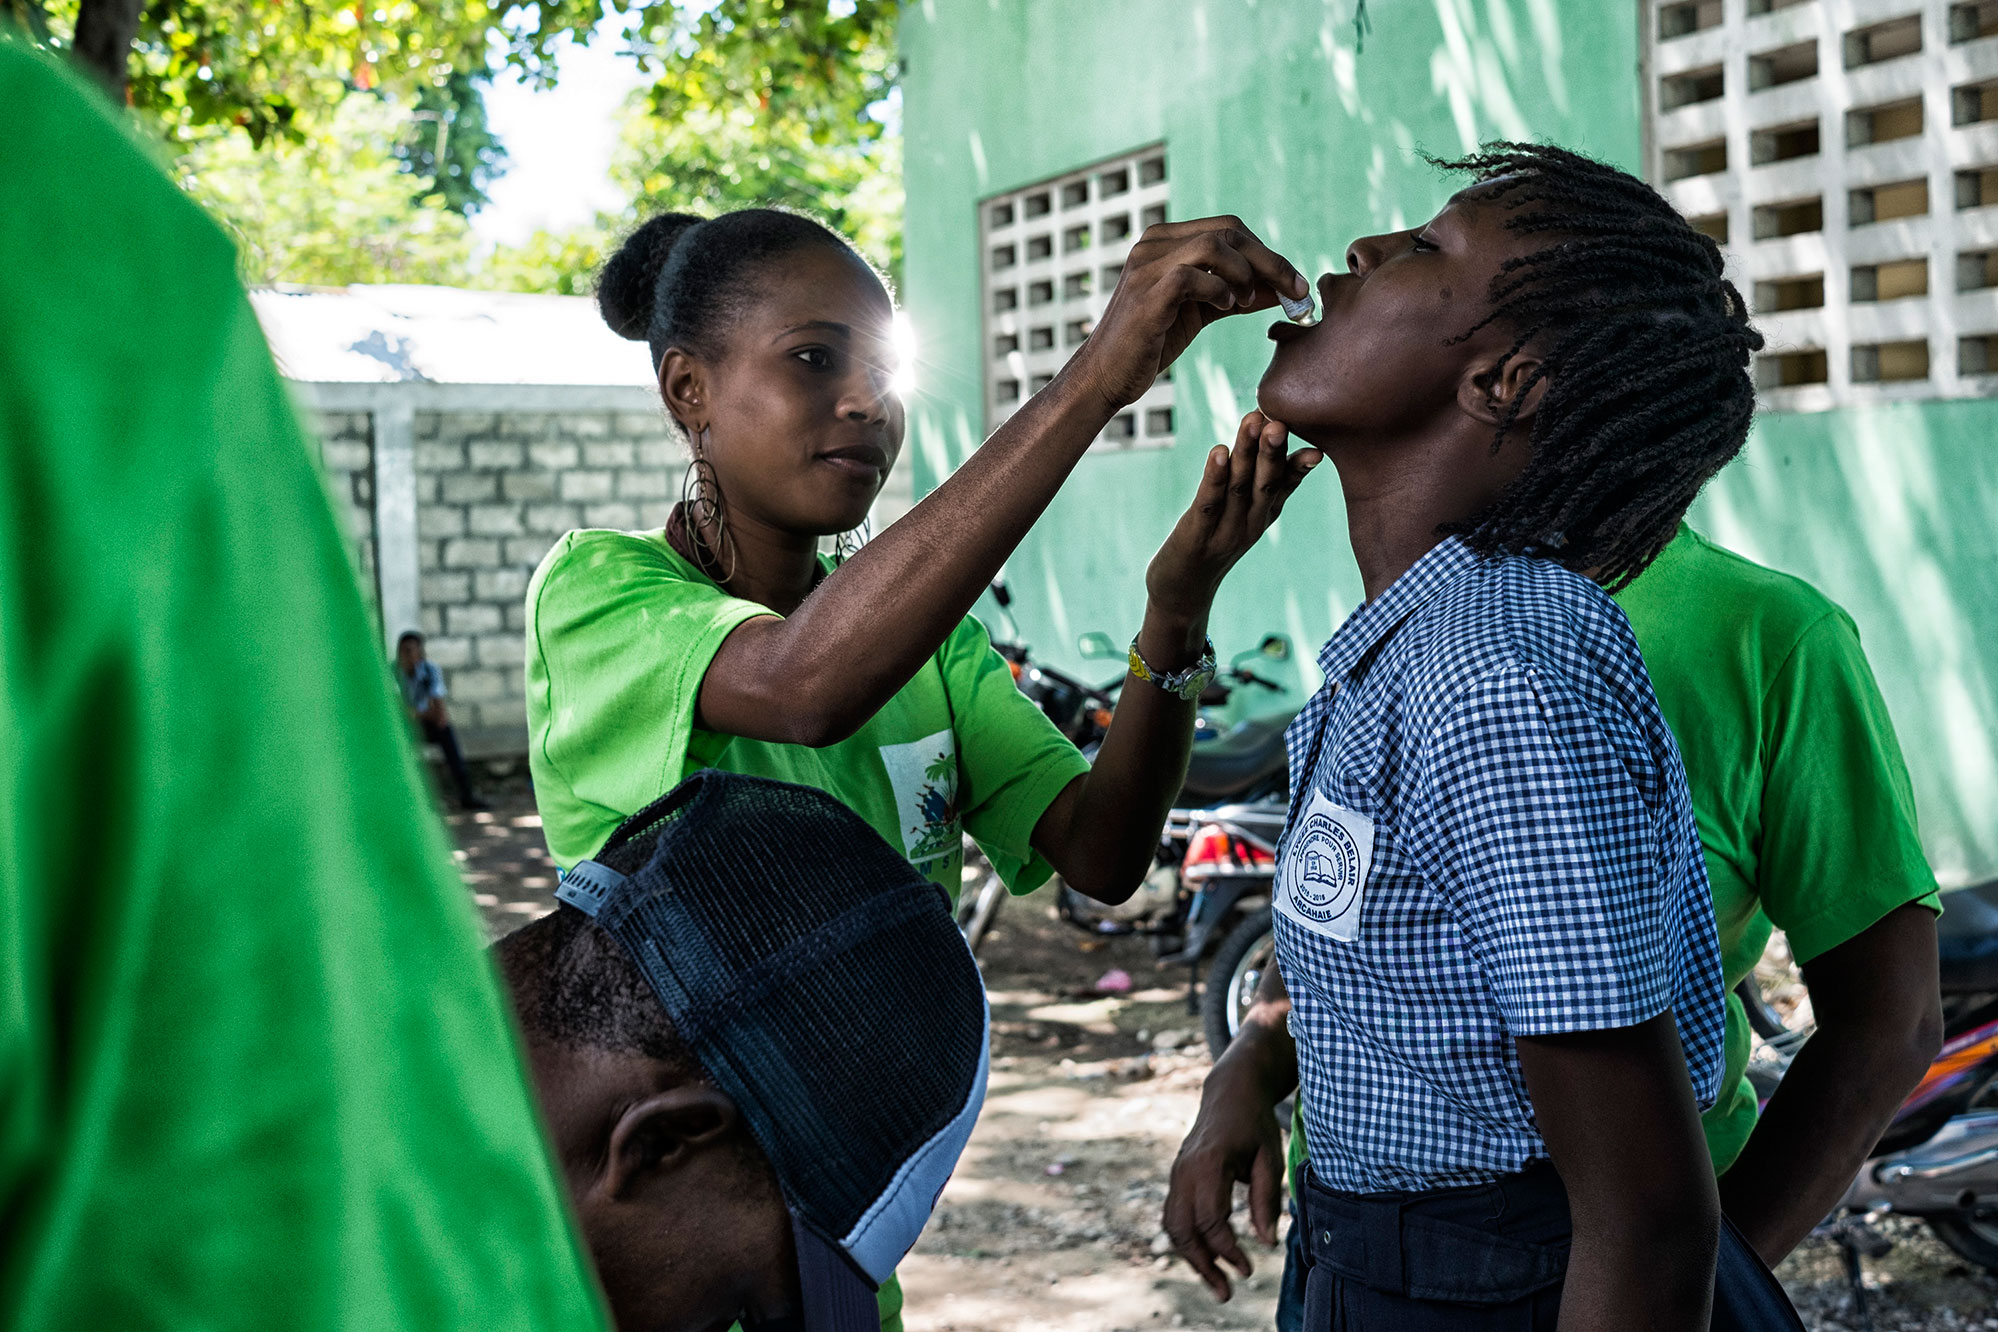 The Pan American Health Organization-World Health Organization (PAHO/WHO), UNICEF and Haiti’s Ministry of Health launched in Archaie the first phase of a cholera vaccination campaign targeting 400,000 persons in 2016. Photo: UN/MINUSTAH/Logan Abassi